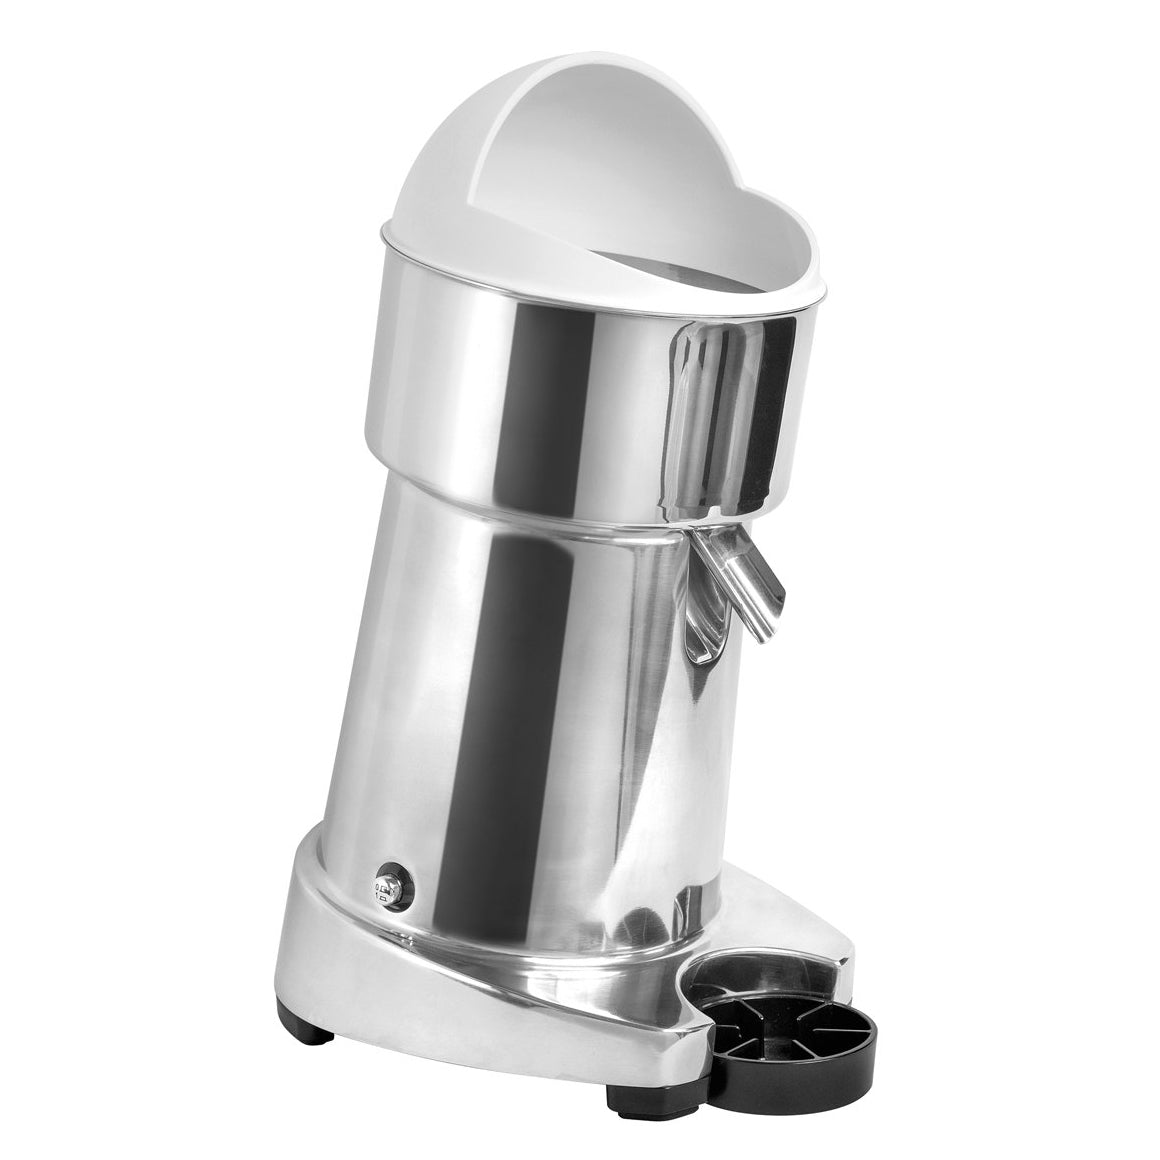 Ceado Commercial Citrus Juicer - Hand Operated